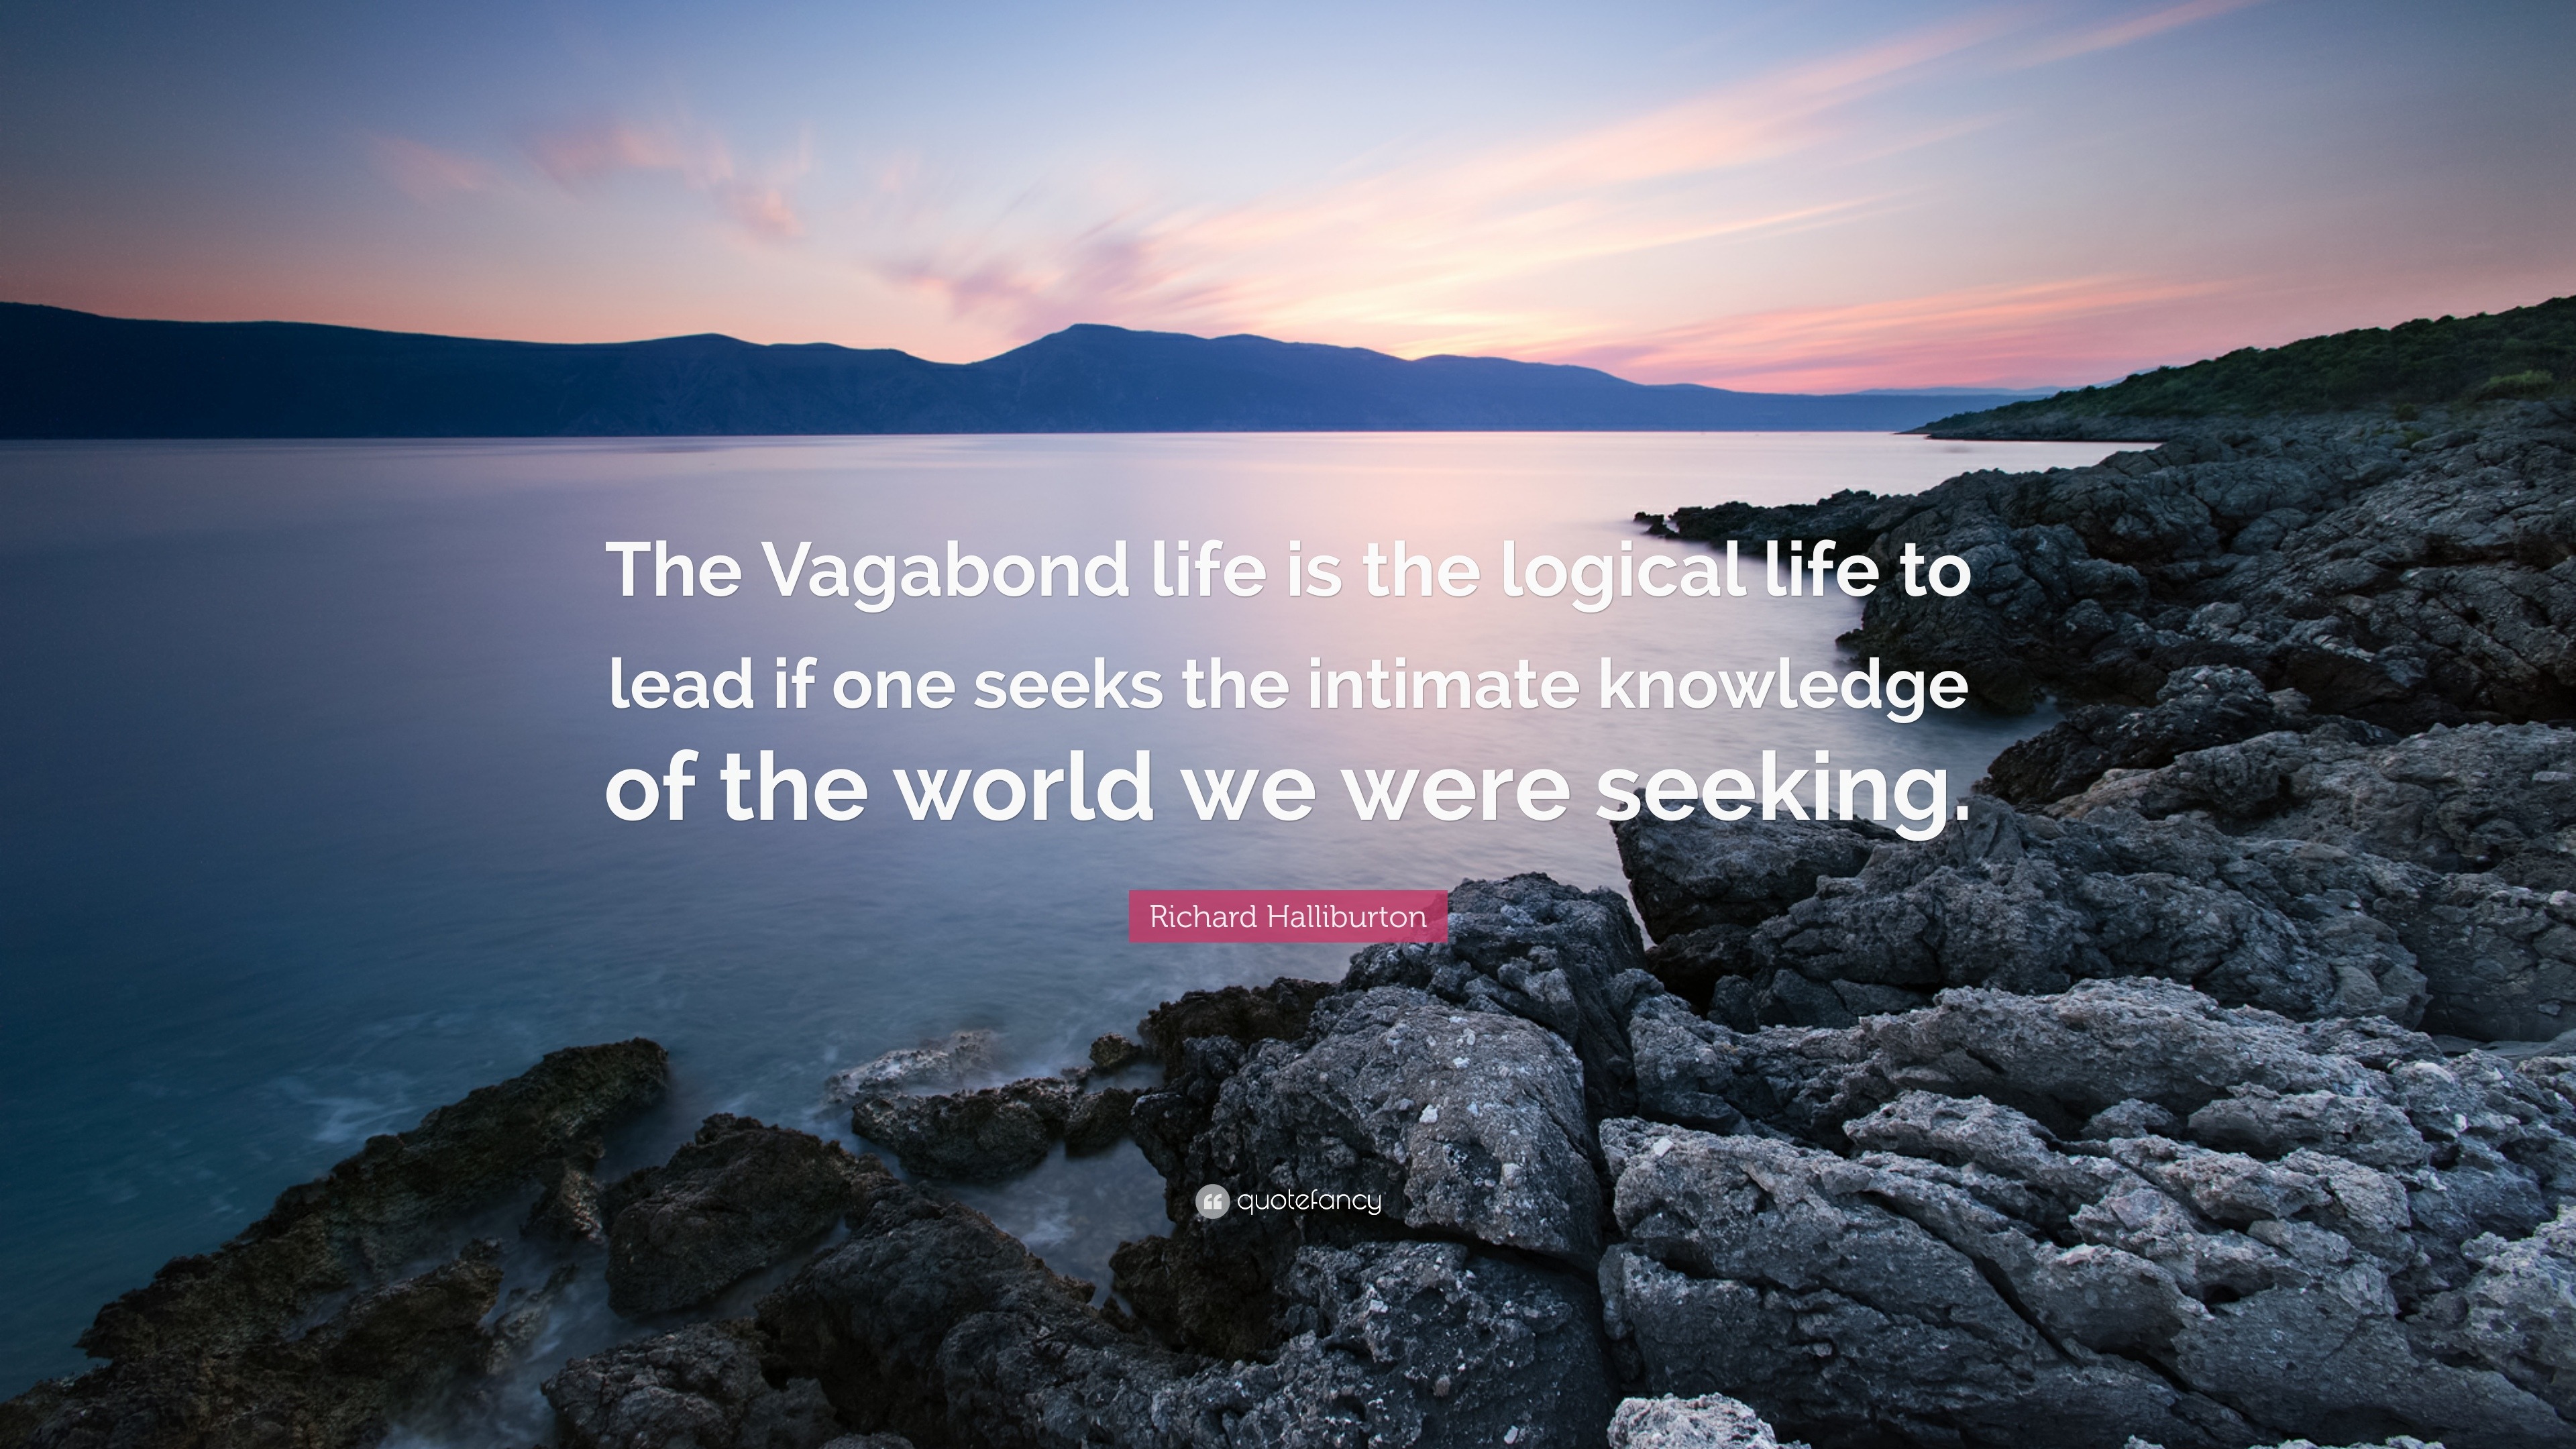 Richard Quote: “The Vagabond life the life to lead if seeks the